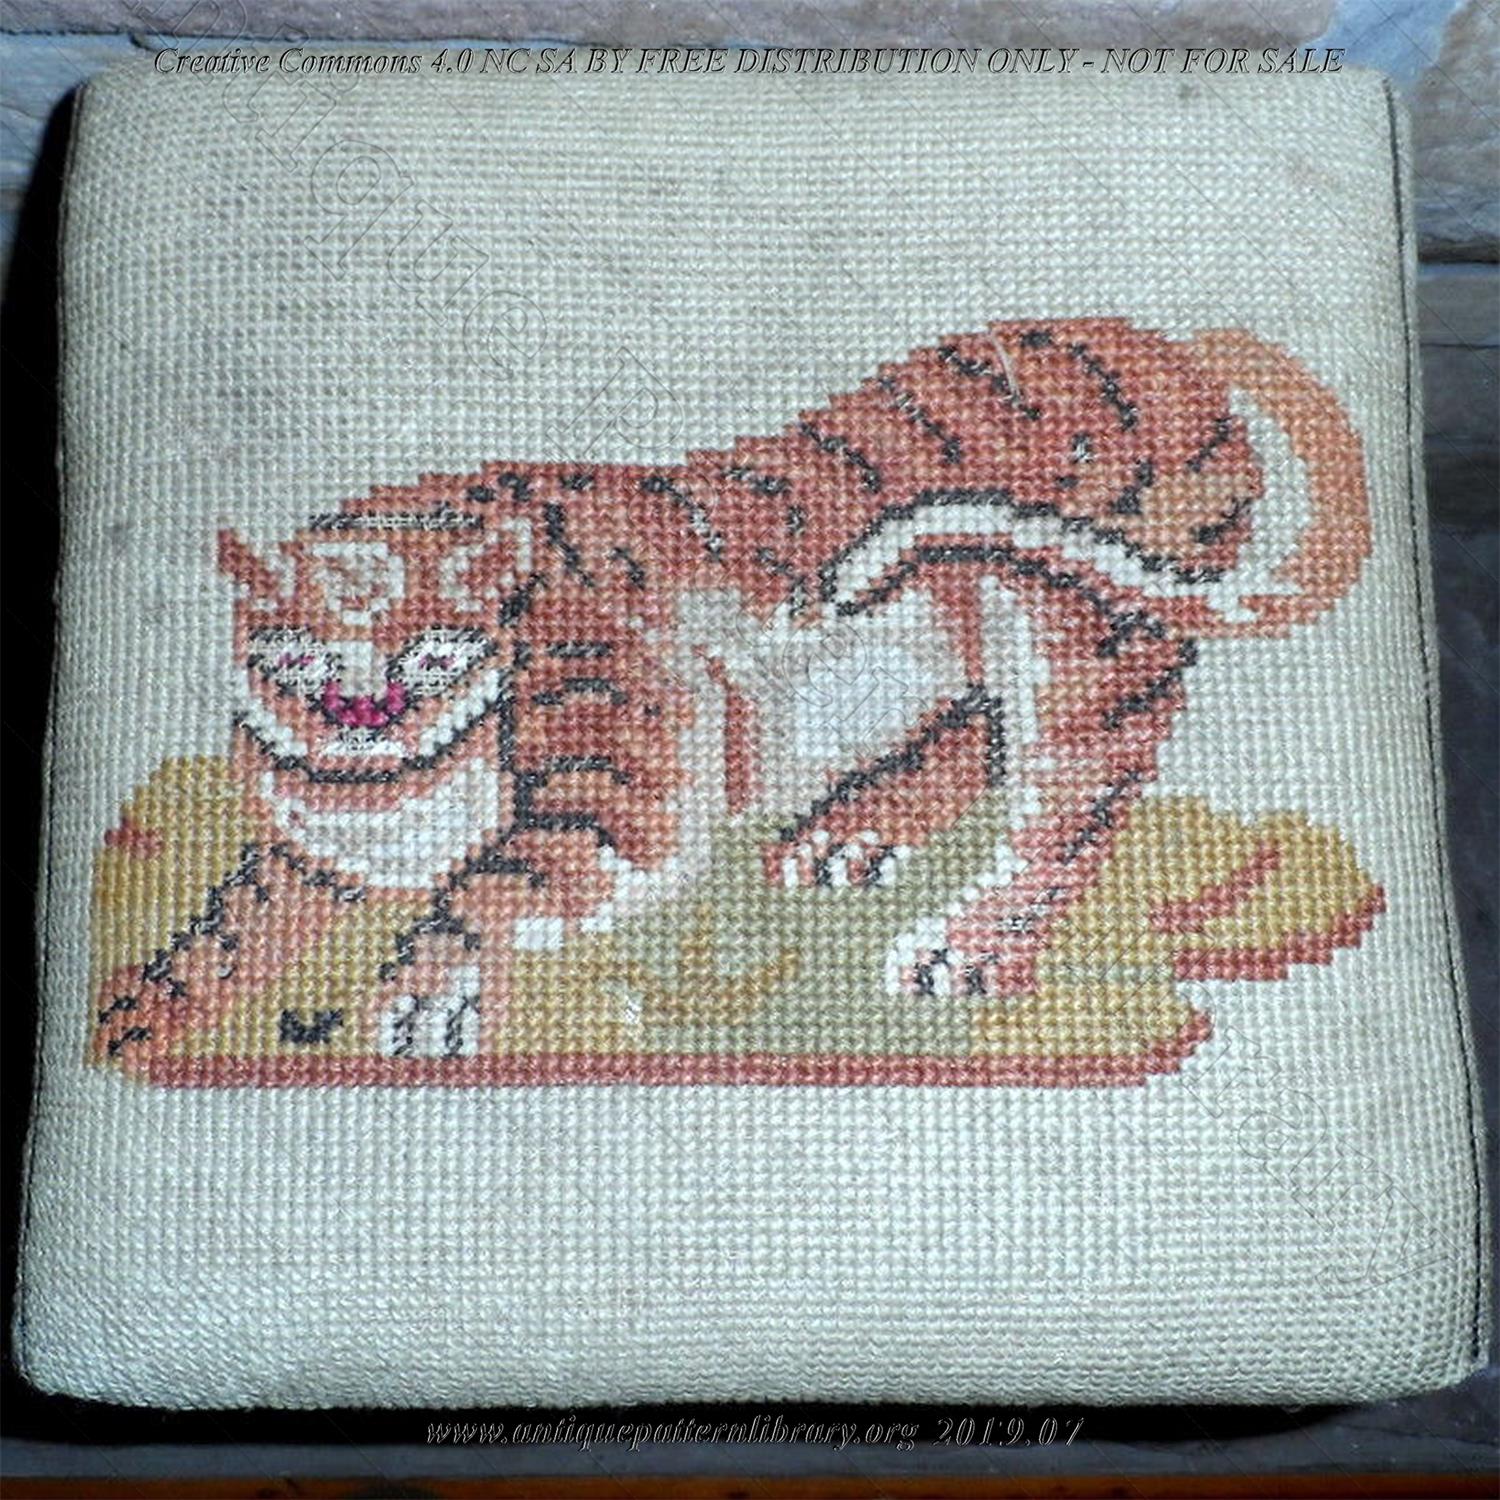 I-PJ001 Tiger embroidered on a stool top